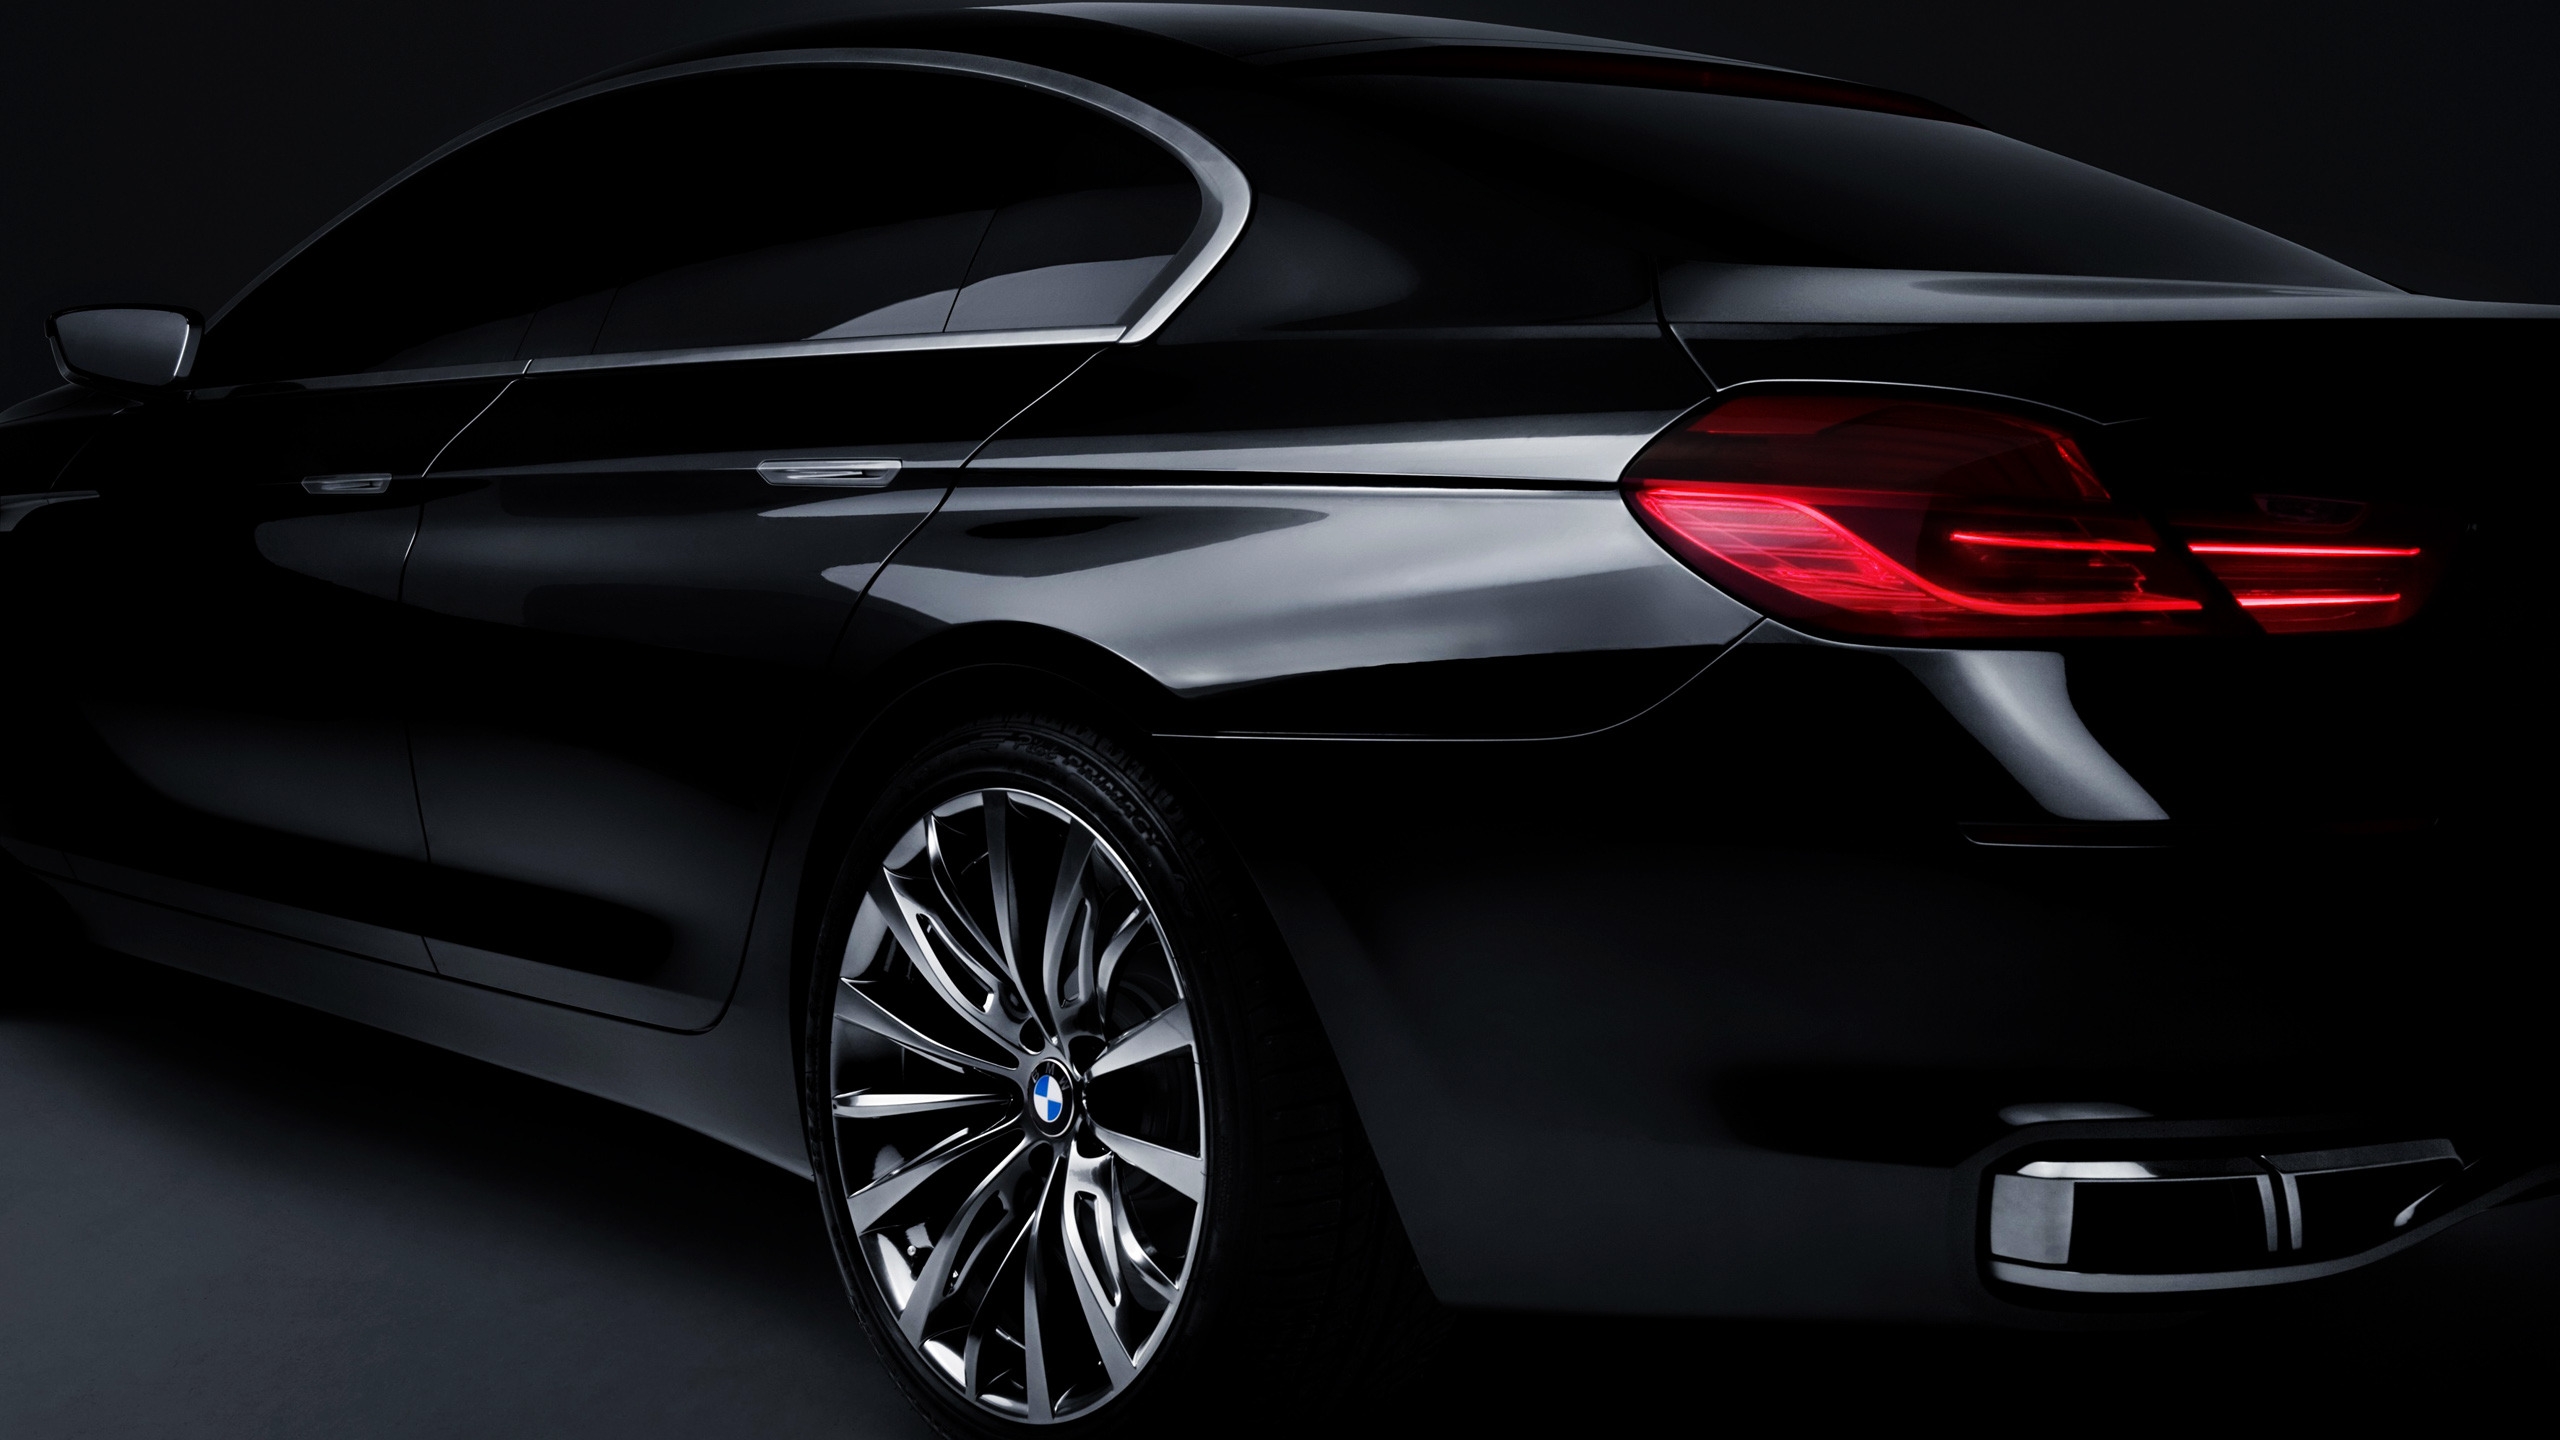 BMW Concept Gran Coupe Rear for 2560x1440 HDTV resolution